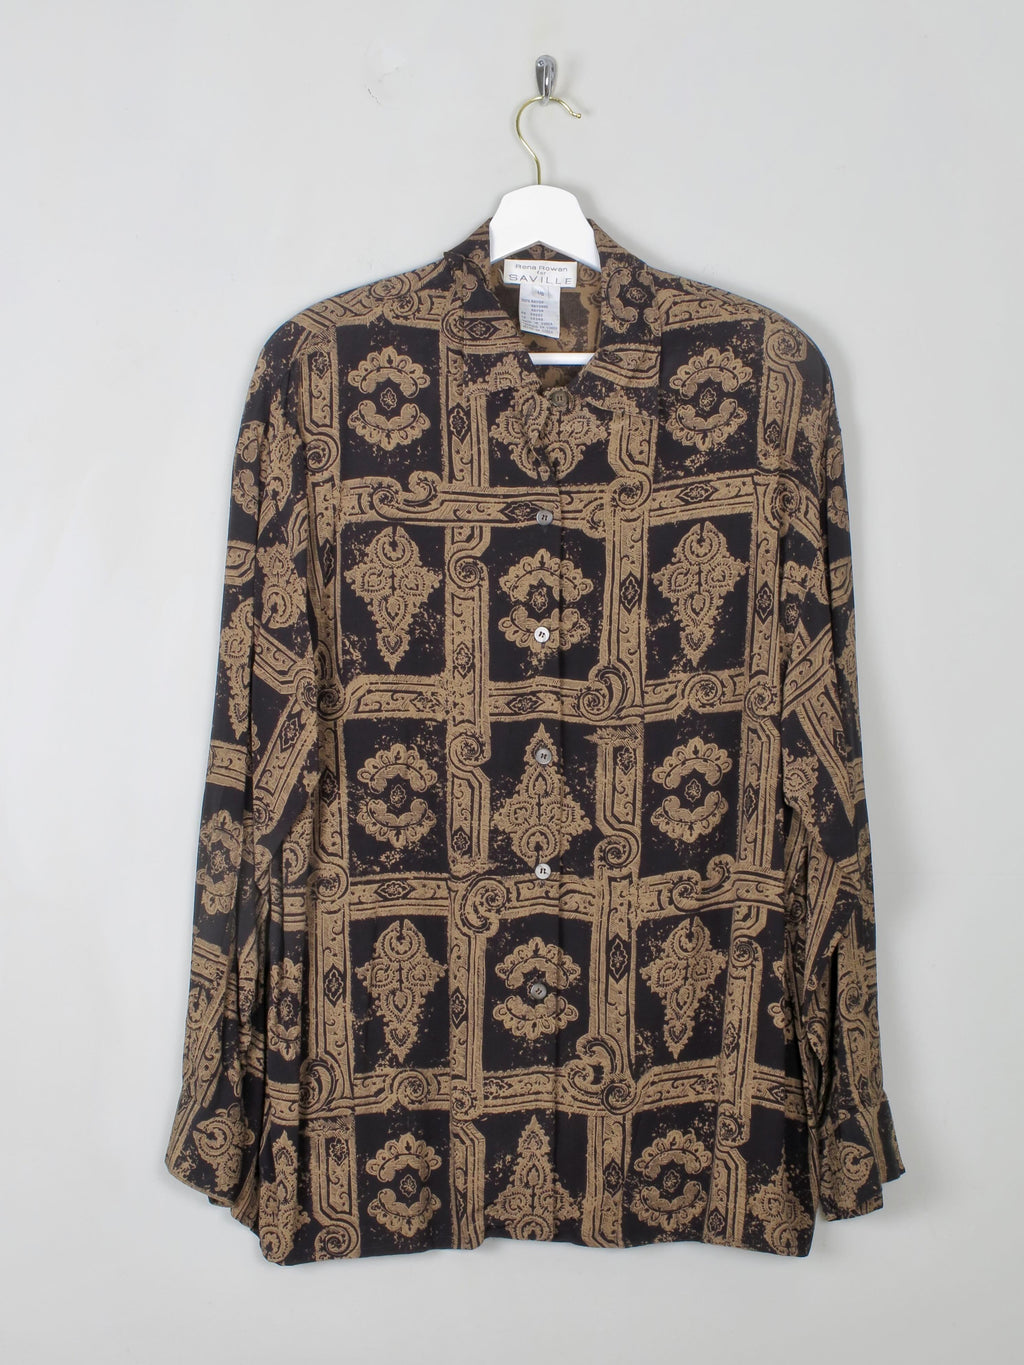 Women's Printed Blouse M/L - The Harlequin